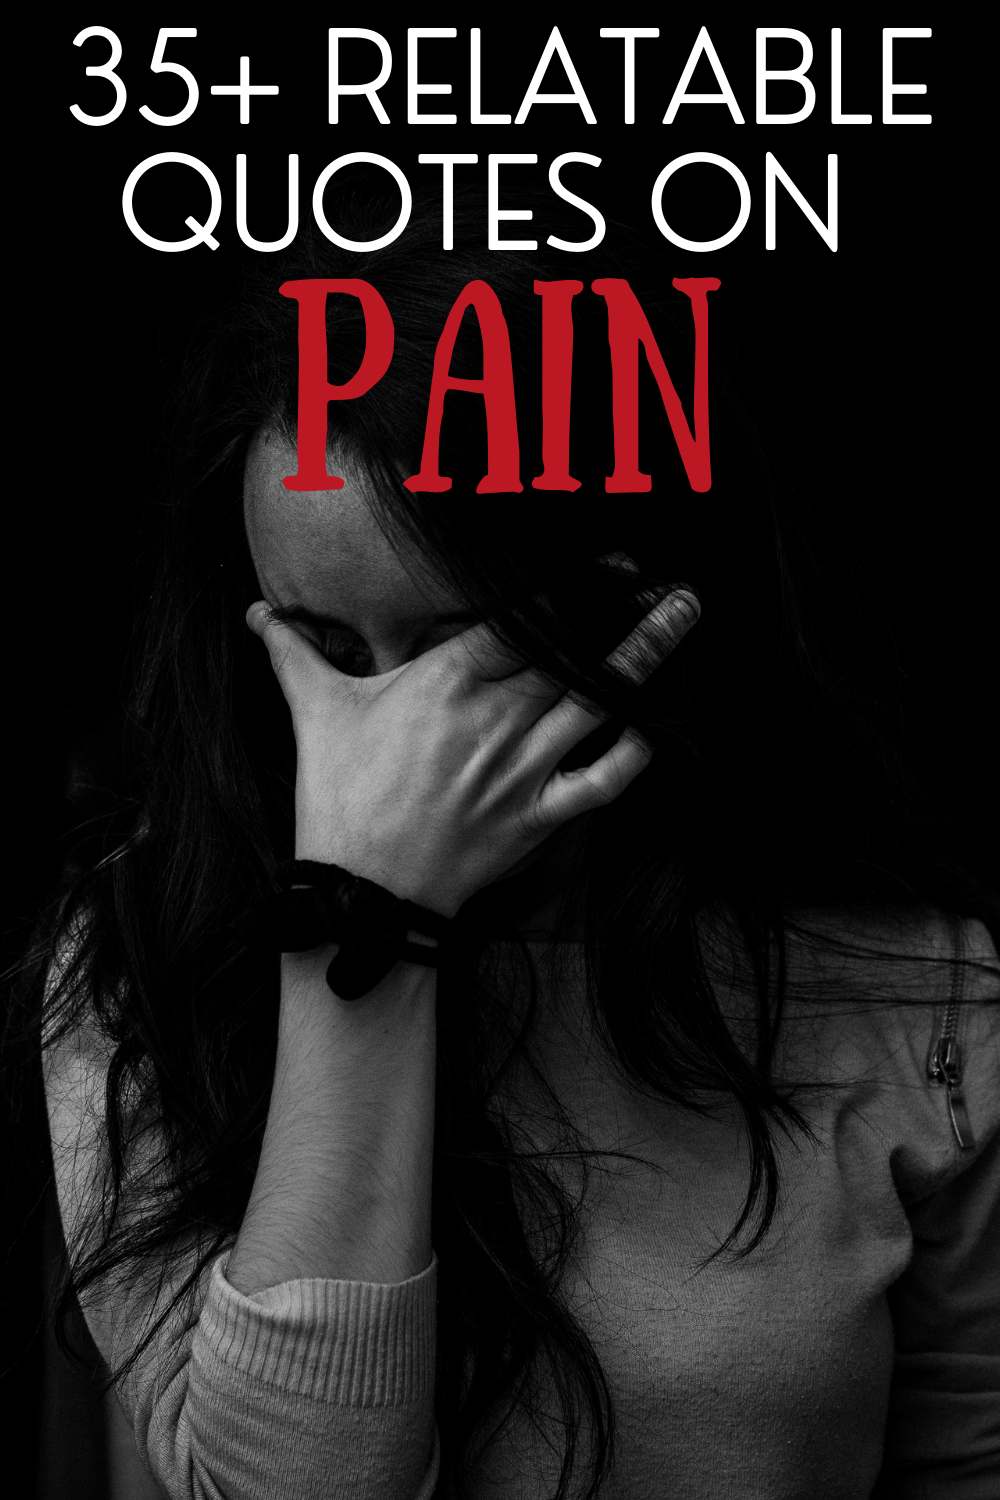 Quotes on Pain